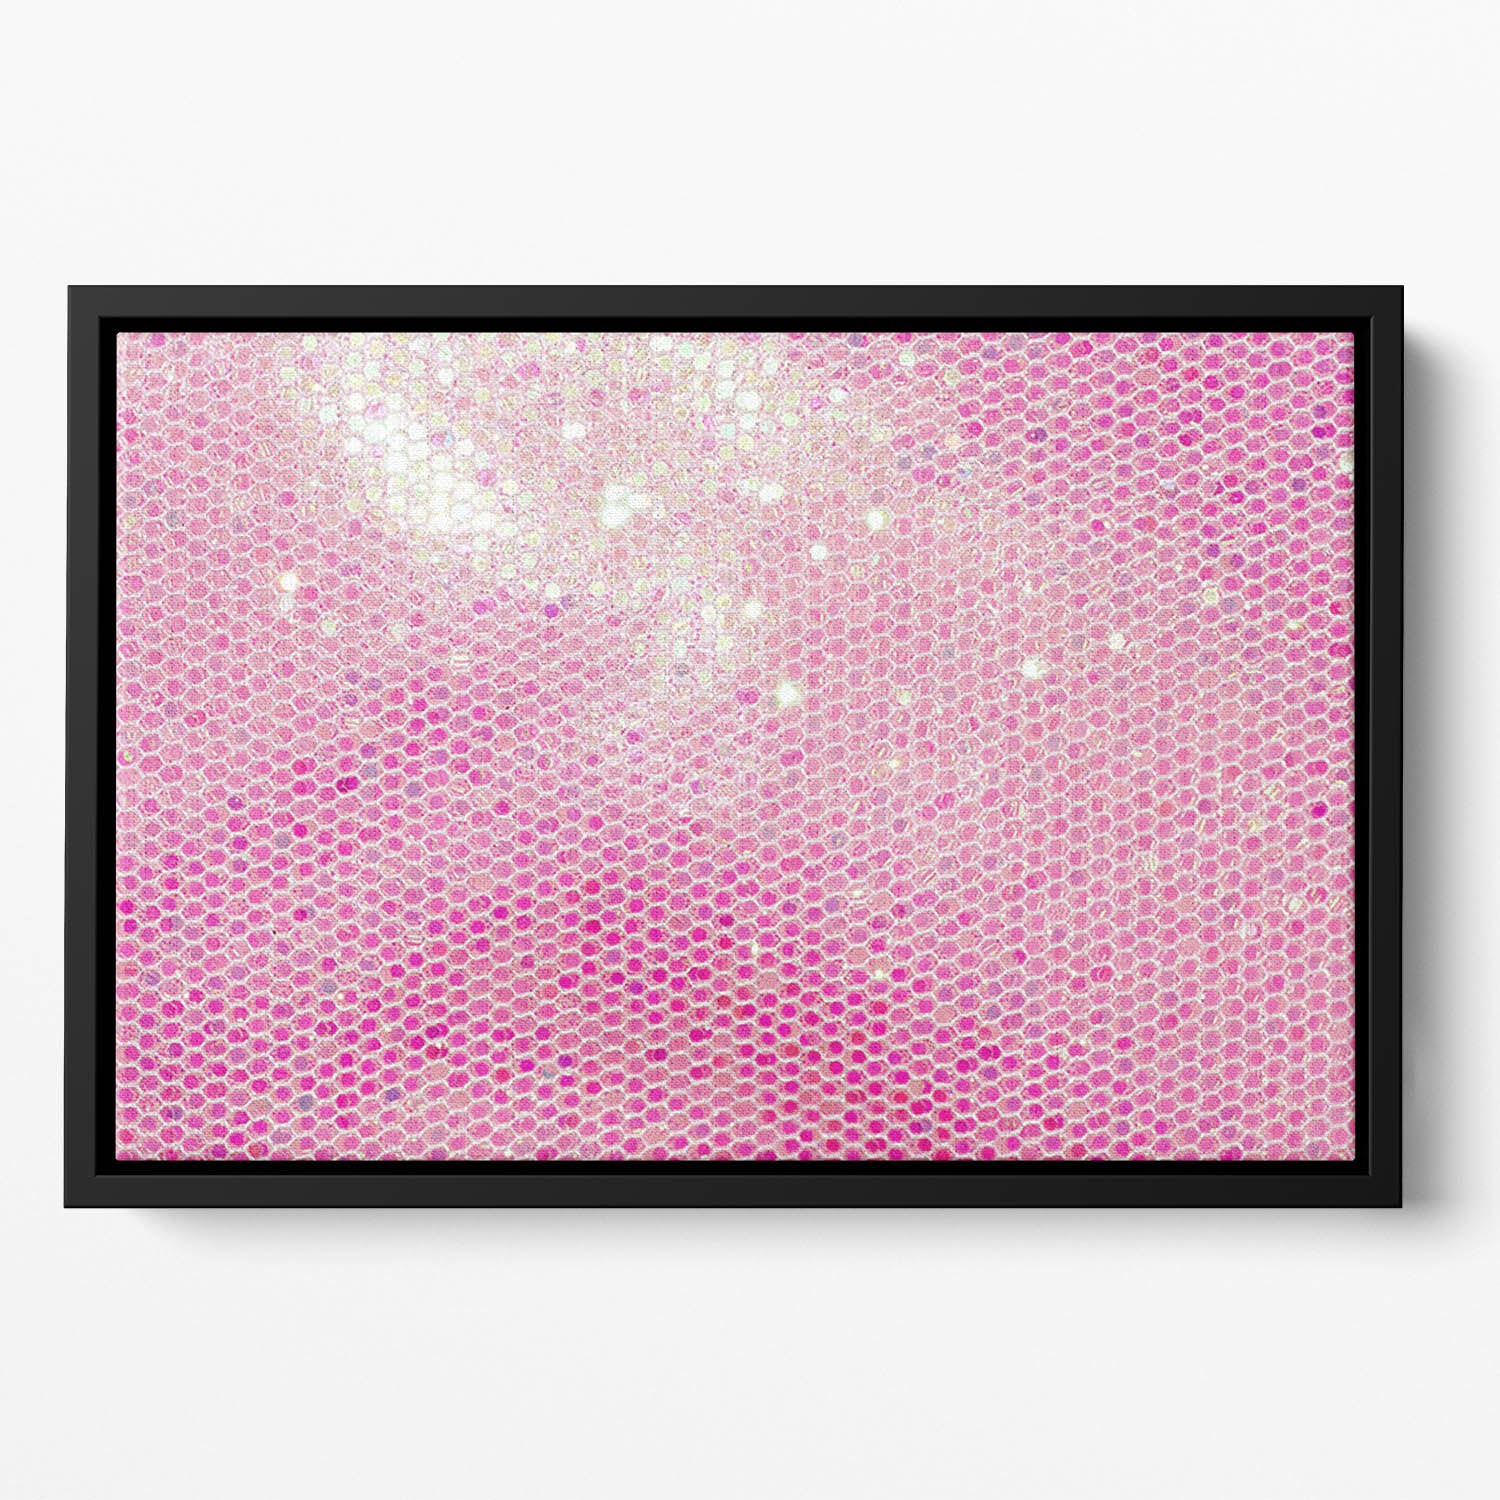 Pale pink sequin fabric Floating Framed Canvas